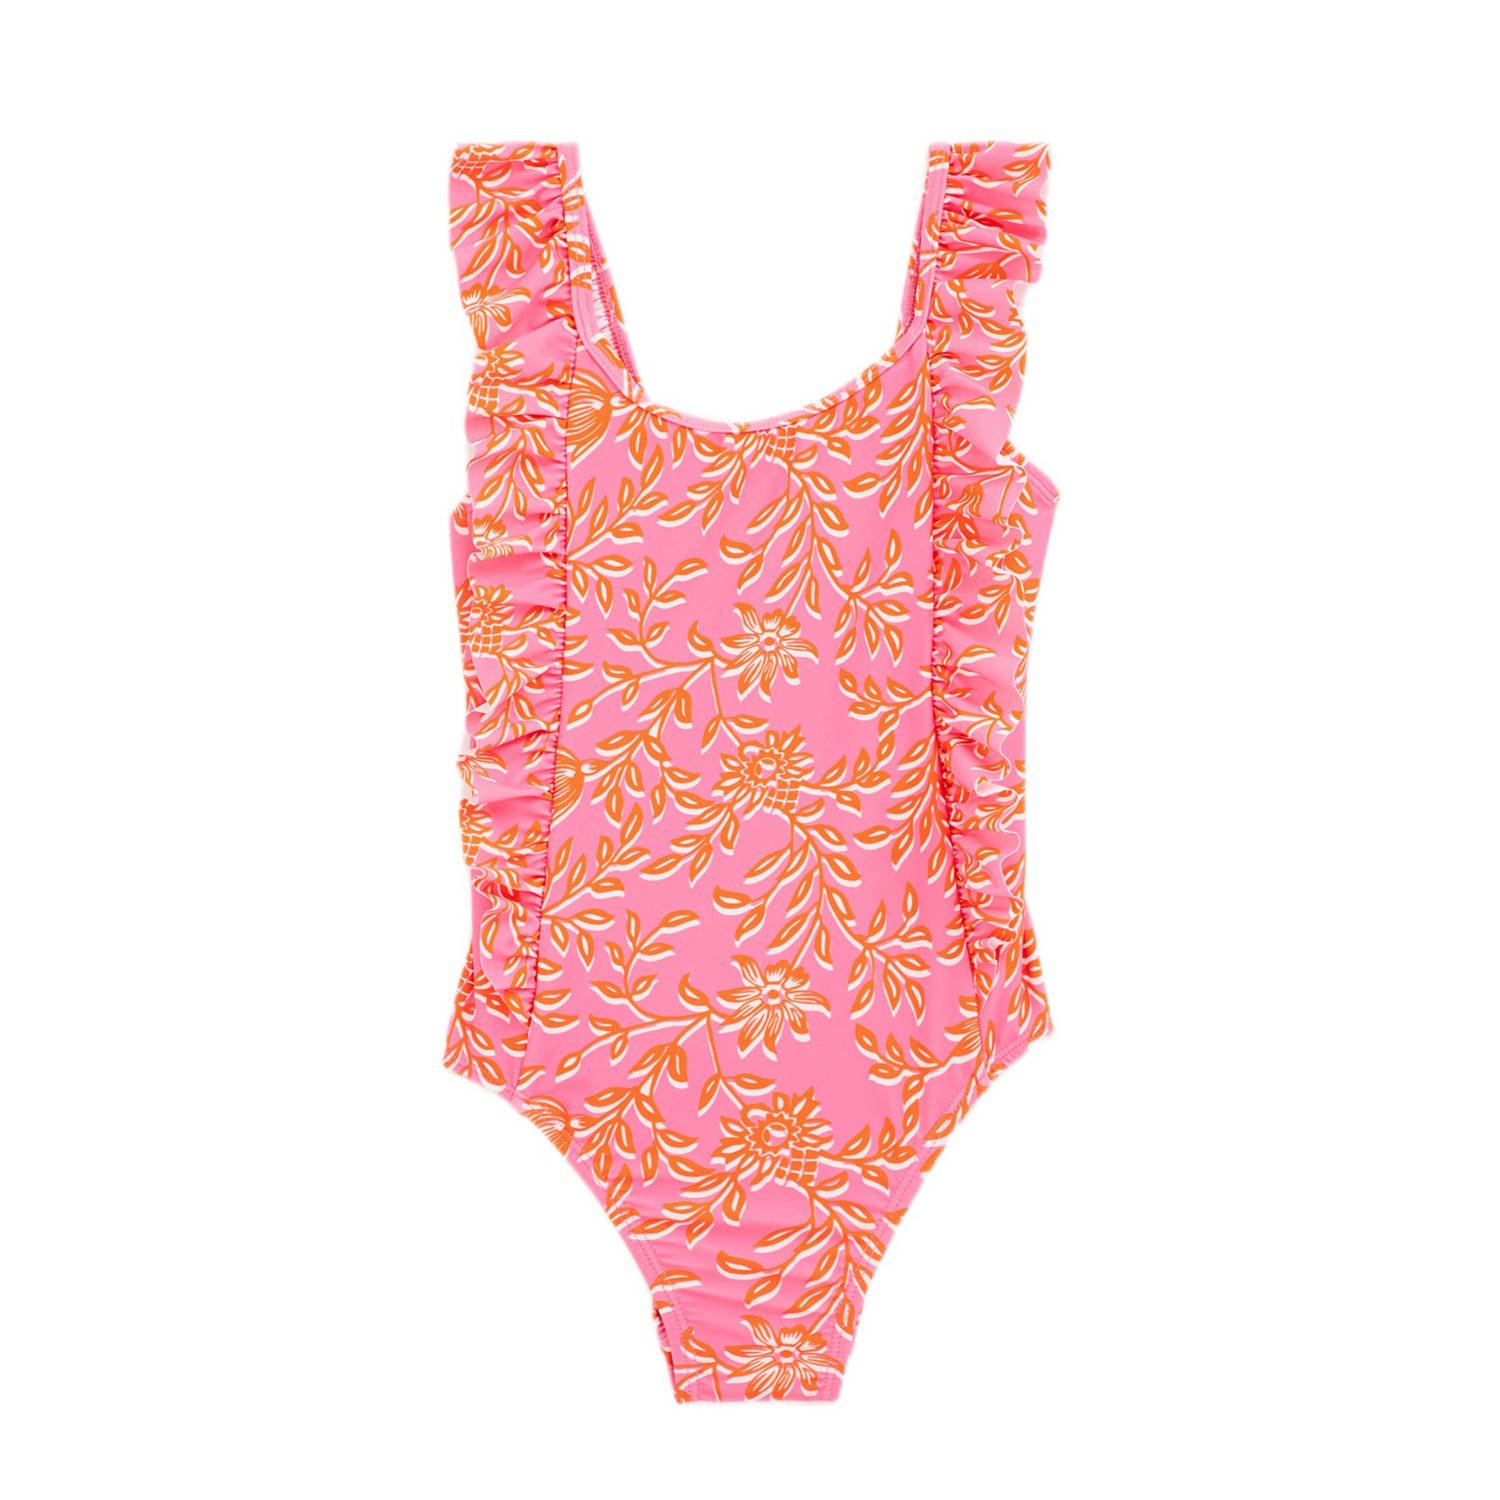 WE Fashion badpak met ruches roze oranje Meisjes Gerecycled polyamide All over print 98 104